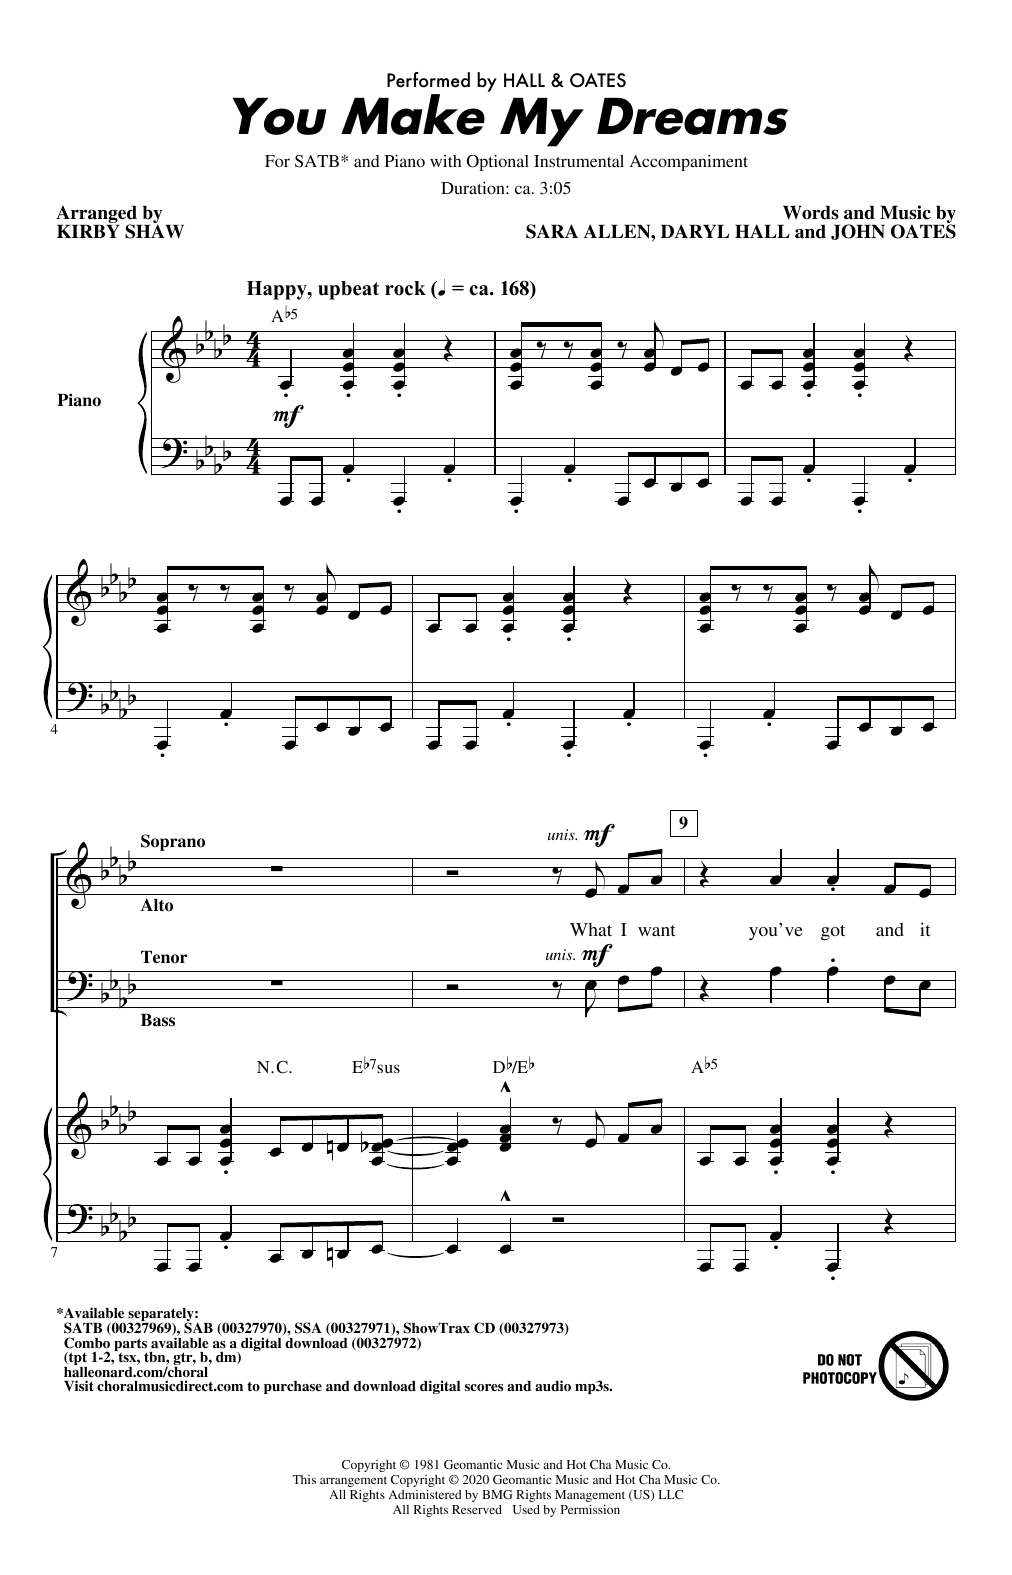 Download Hall & Oates You Make My Dreams (arr. Kirby Shaw) Sheet Music